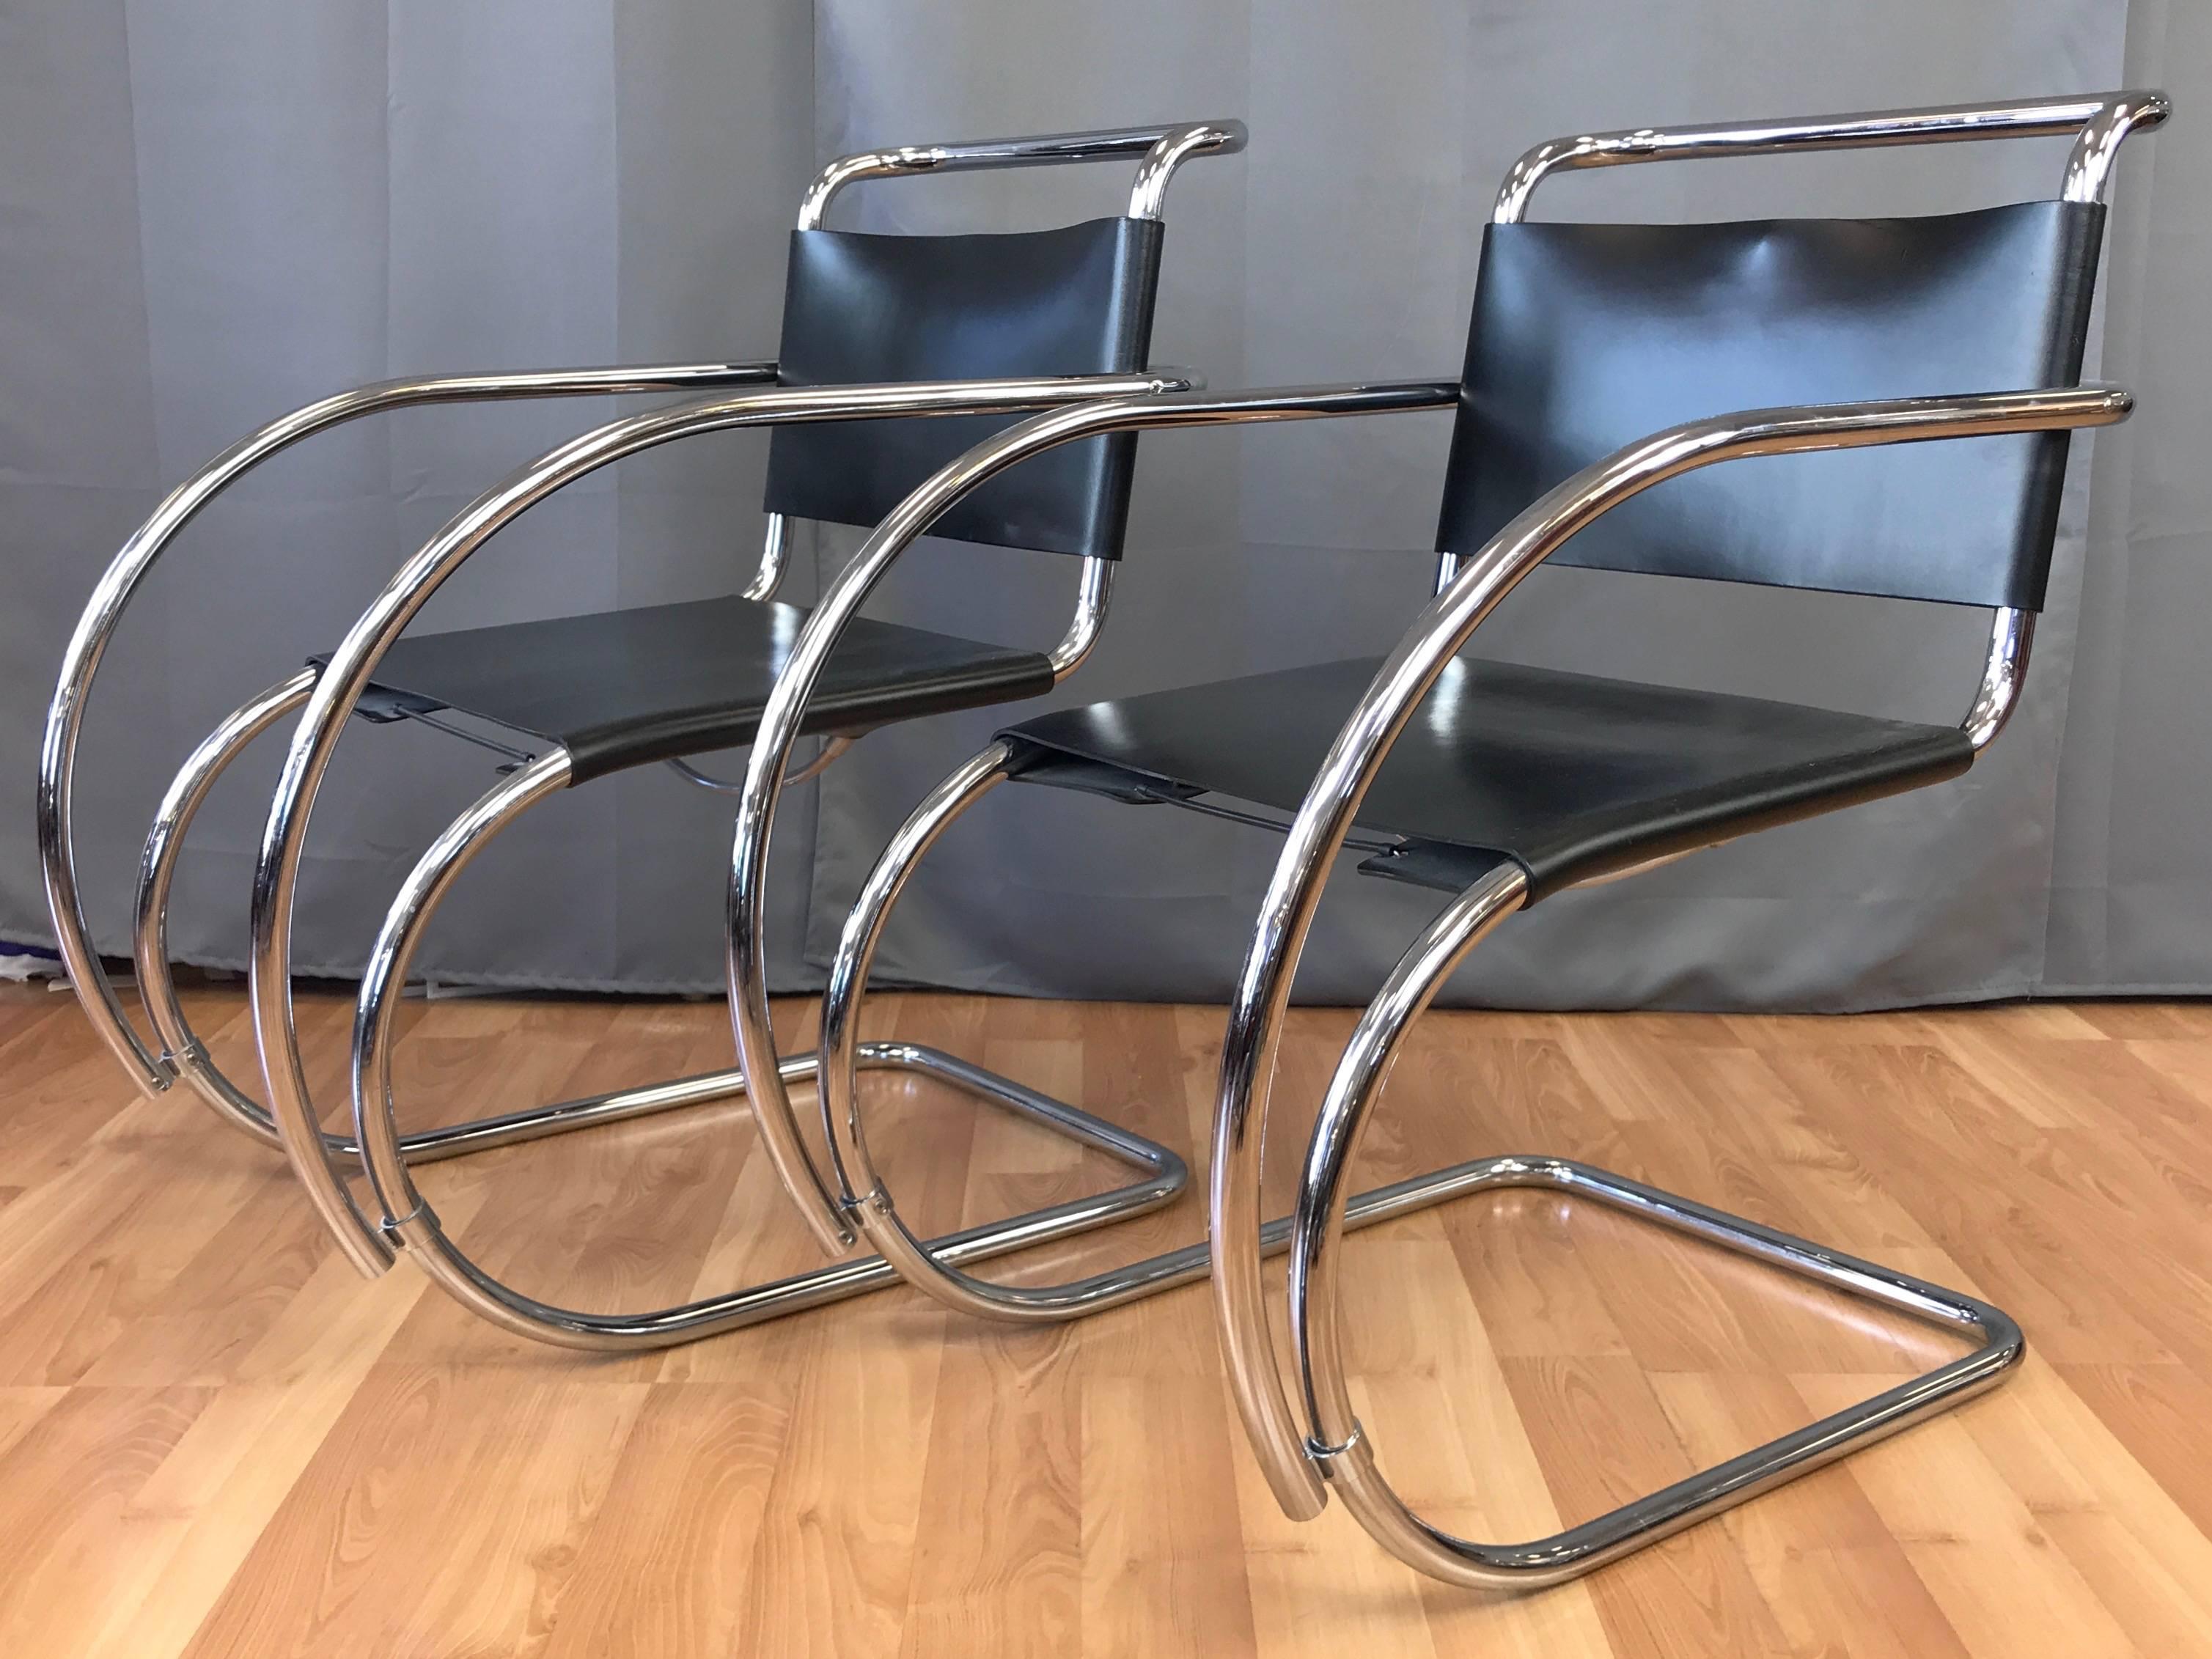 A pair of vintage MR armchairs by Ludwig Mies van der Rohe, manufactured and imported by Stendig. Designed in 1927, this pair dates from 1987 and is in fantastic vintage condition. 

Iconic minimalist design features a cantilevered polished